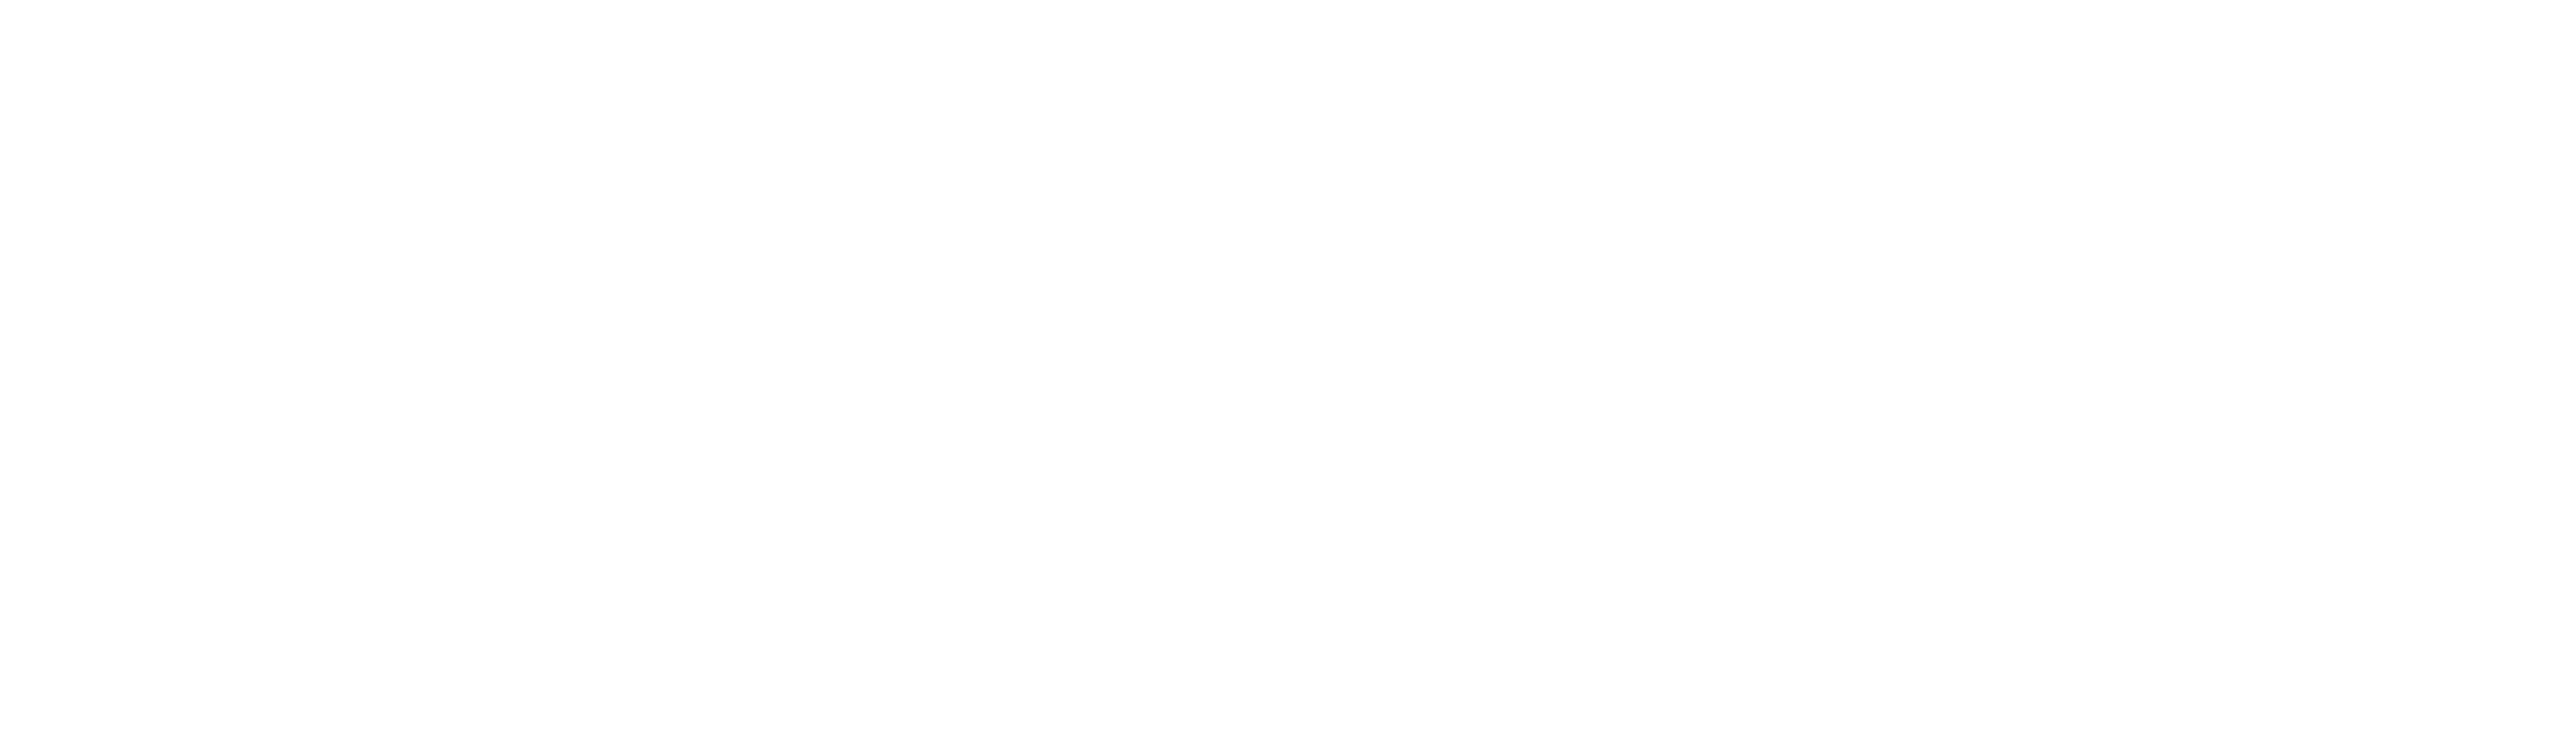 bluewaters-logo.png